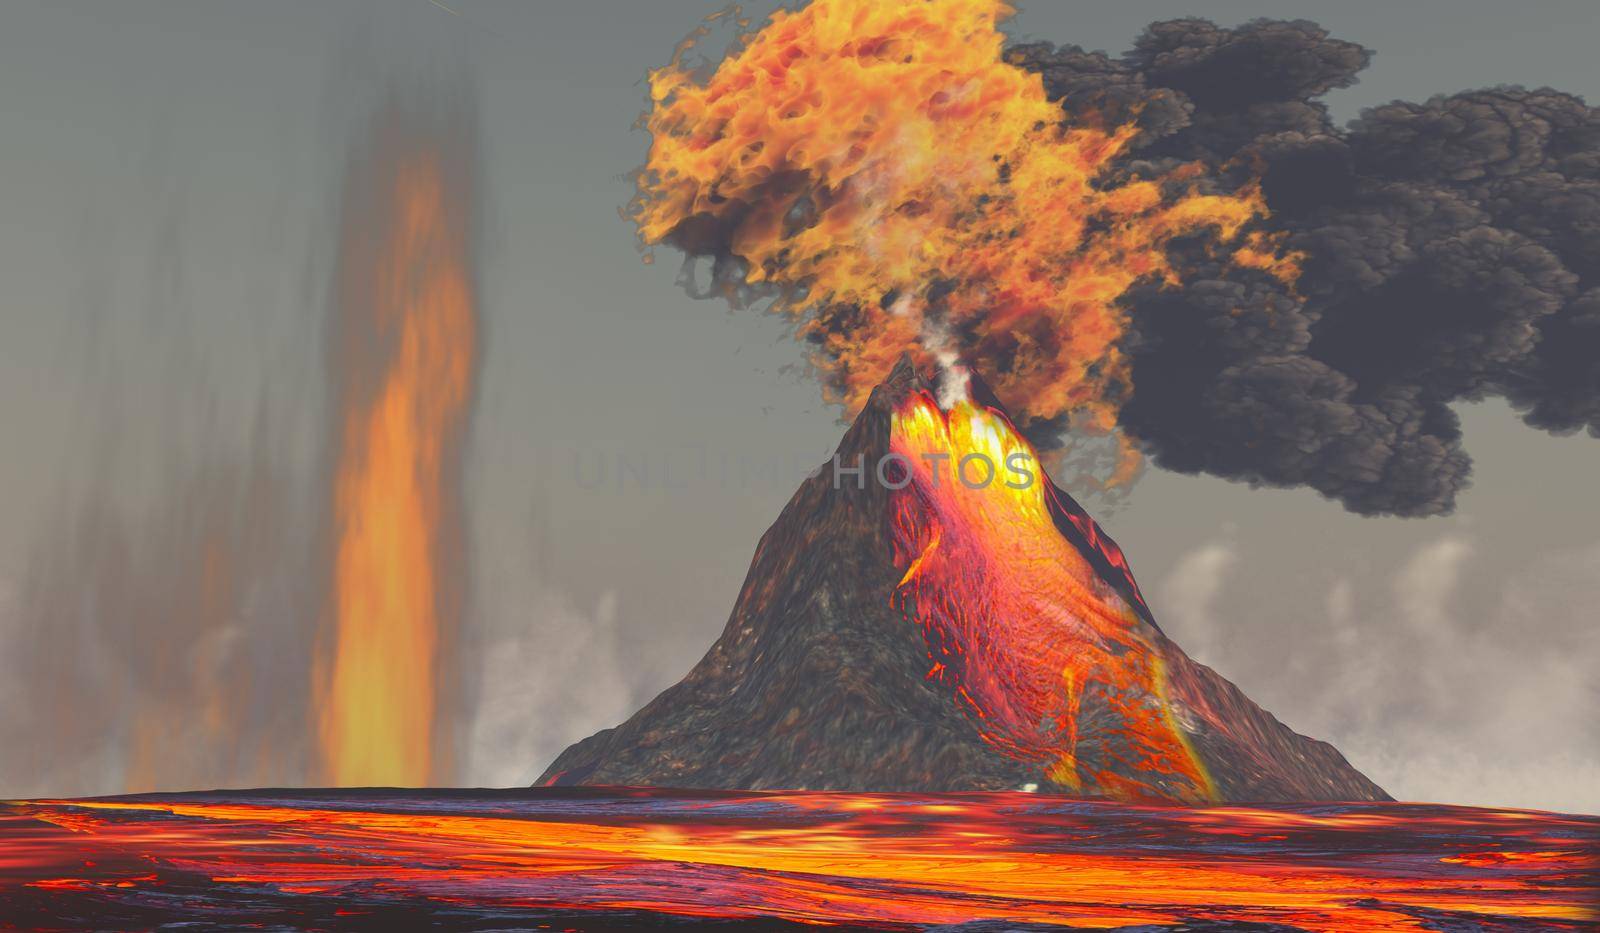 Volcano with Lava and Fire by Catmando